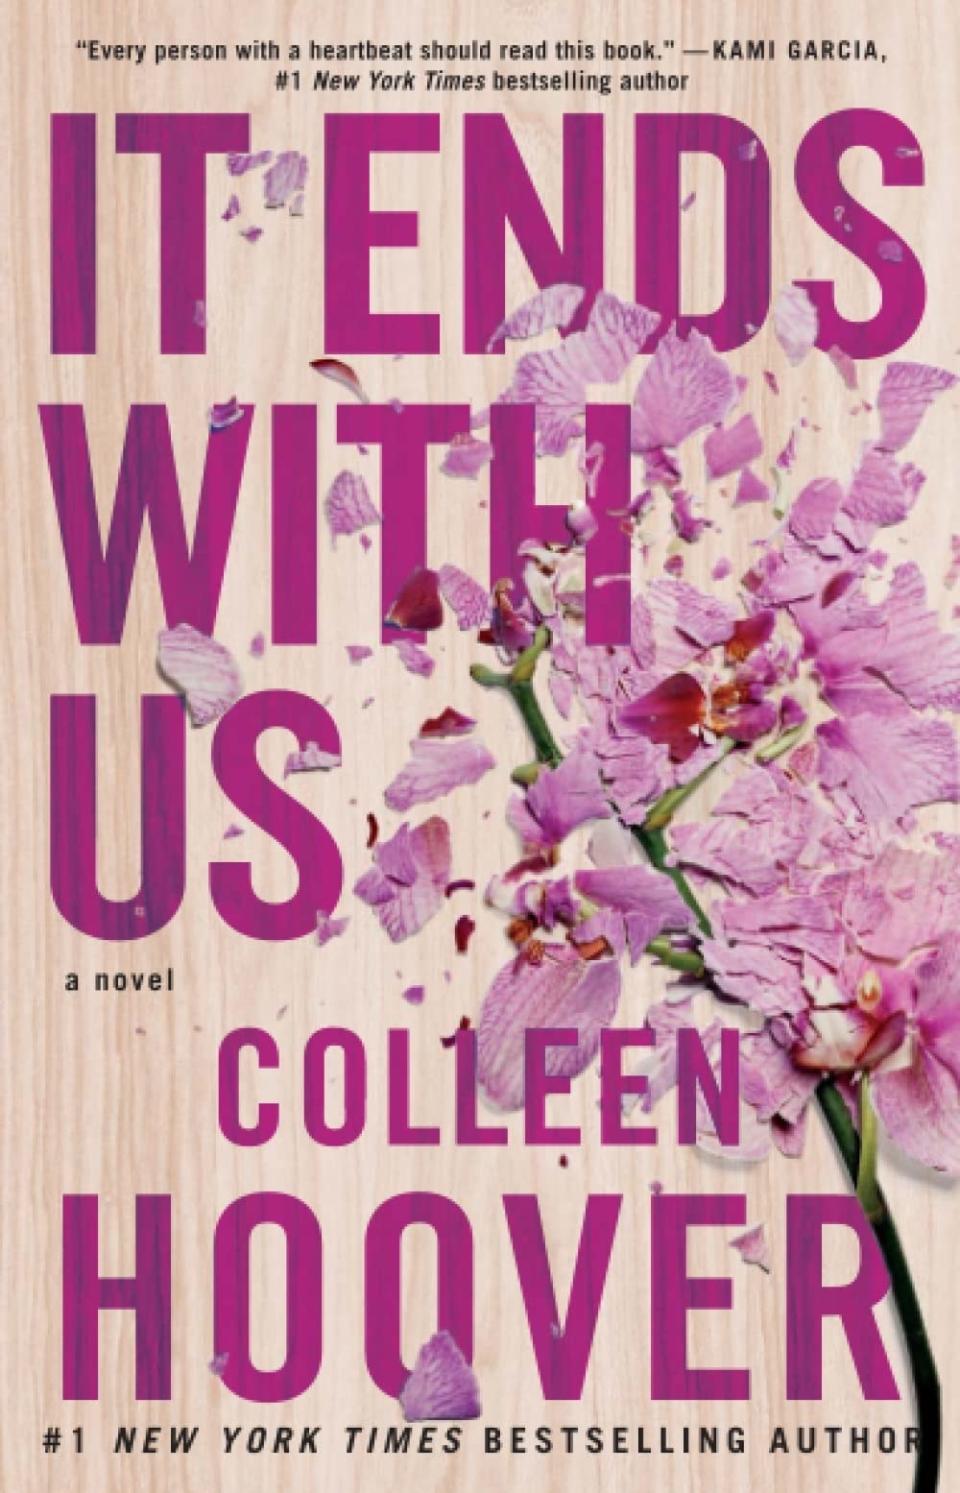 The cover of "It Ends With Us" by Colleen Hoover.